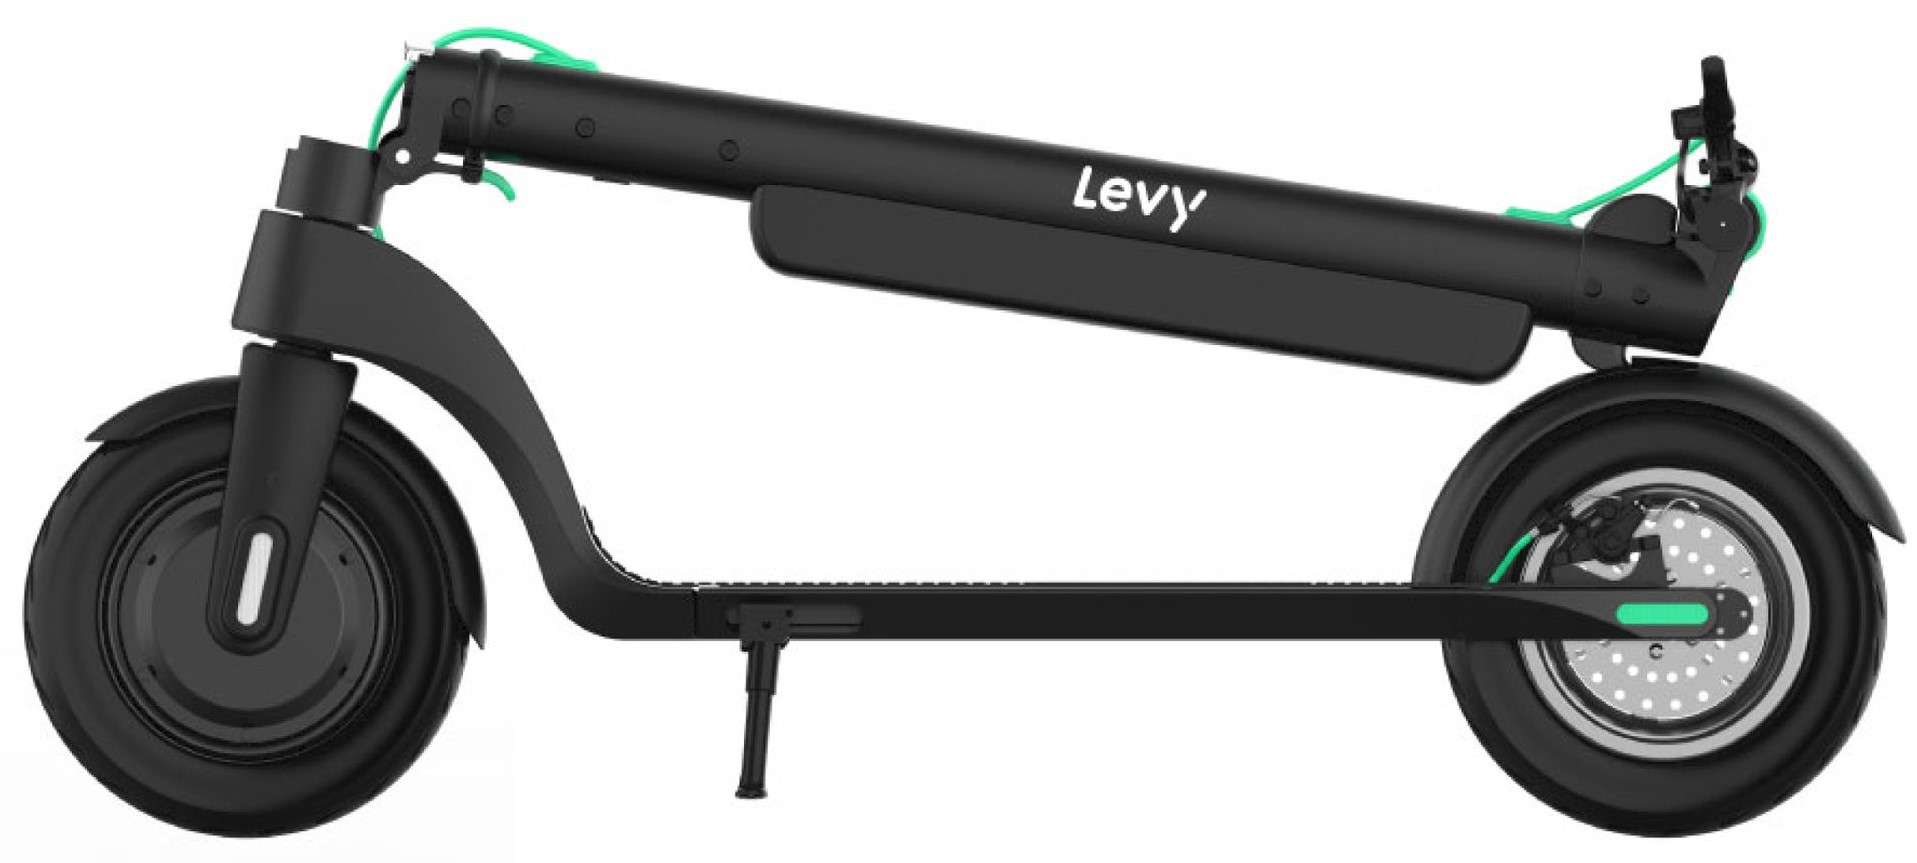 levy plus electric scooter folded